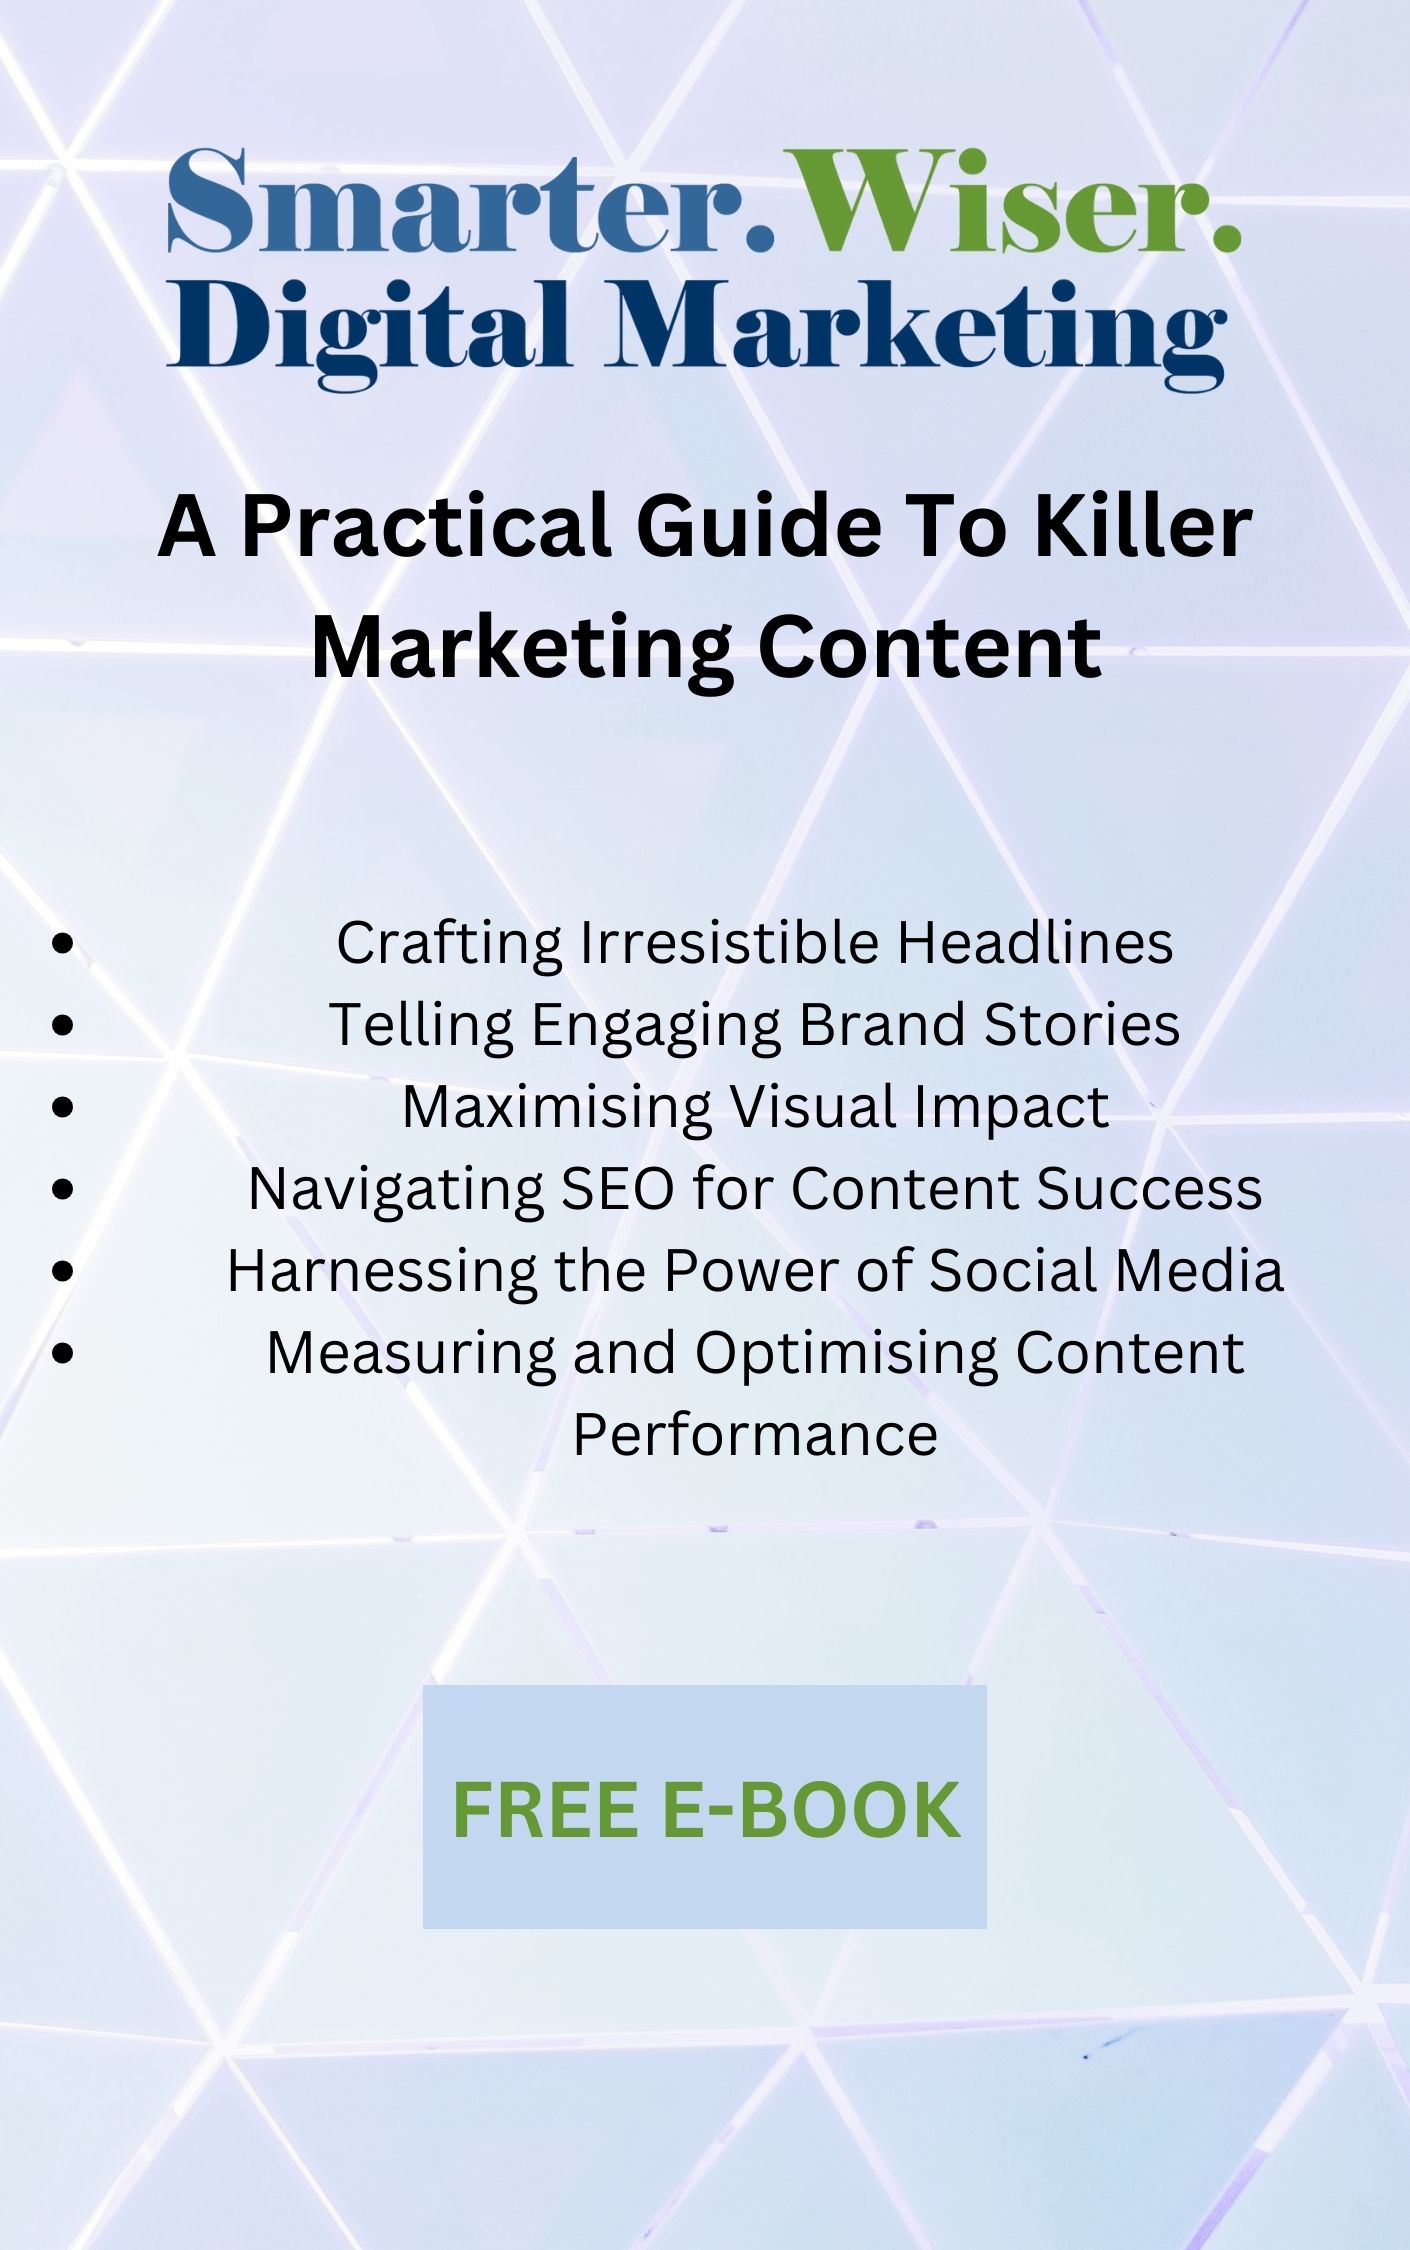 Practical Guide to Killer Marketing